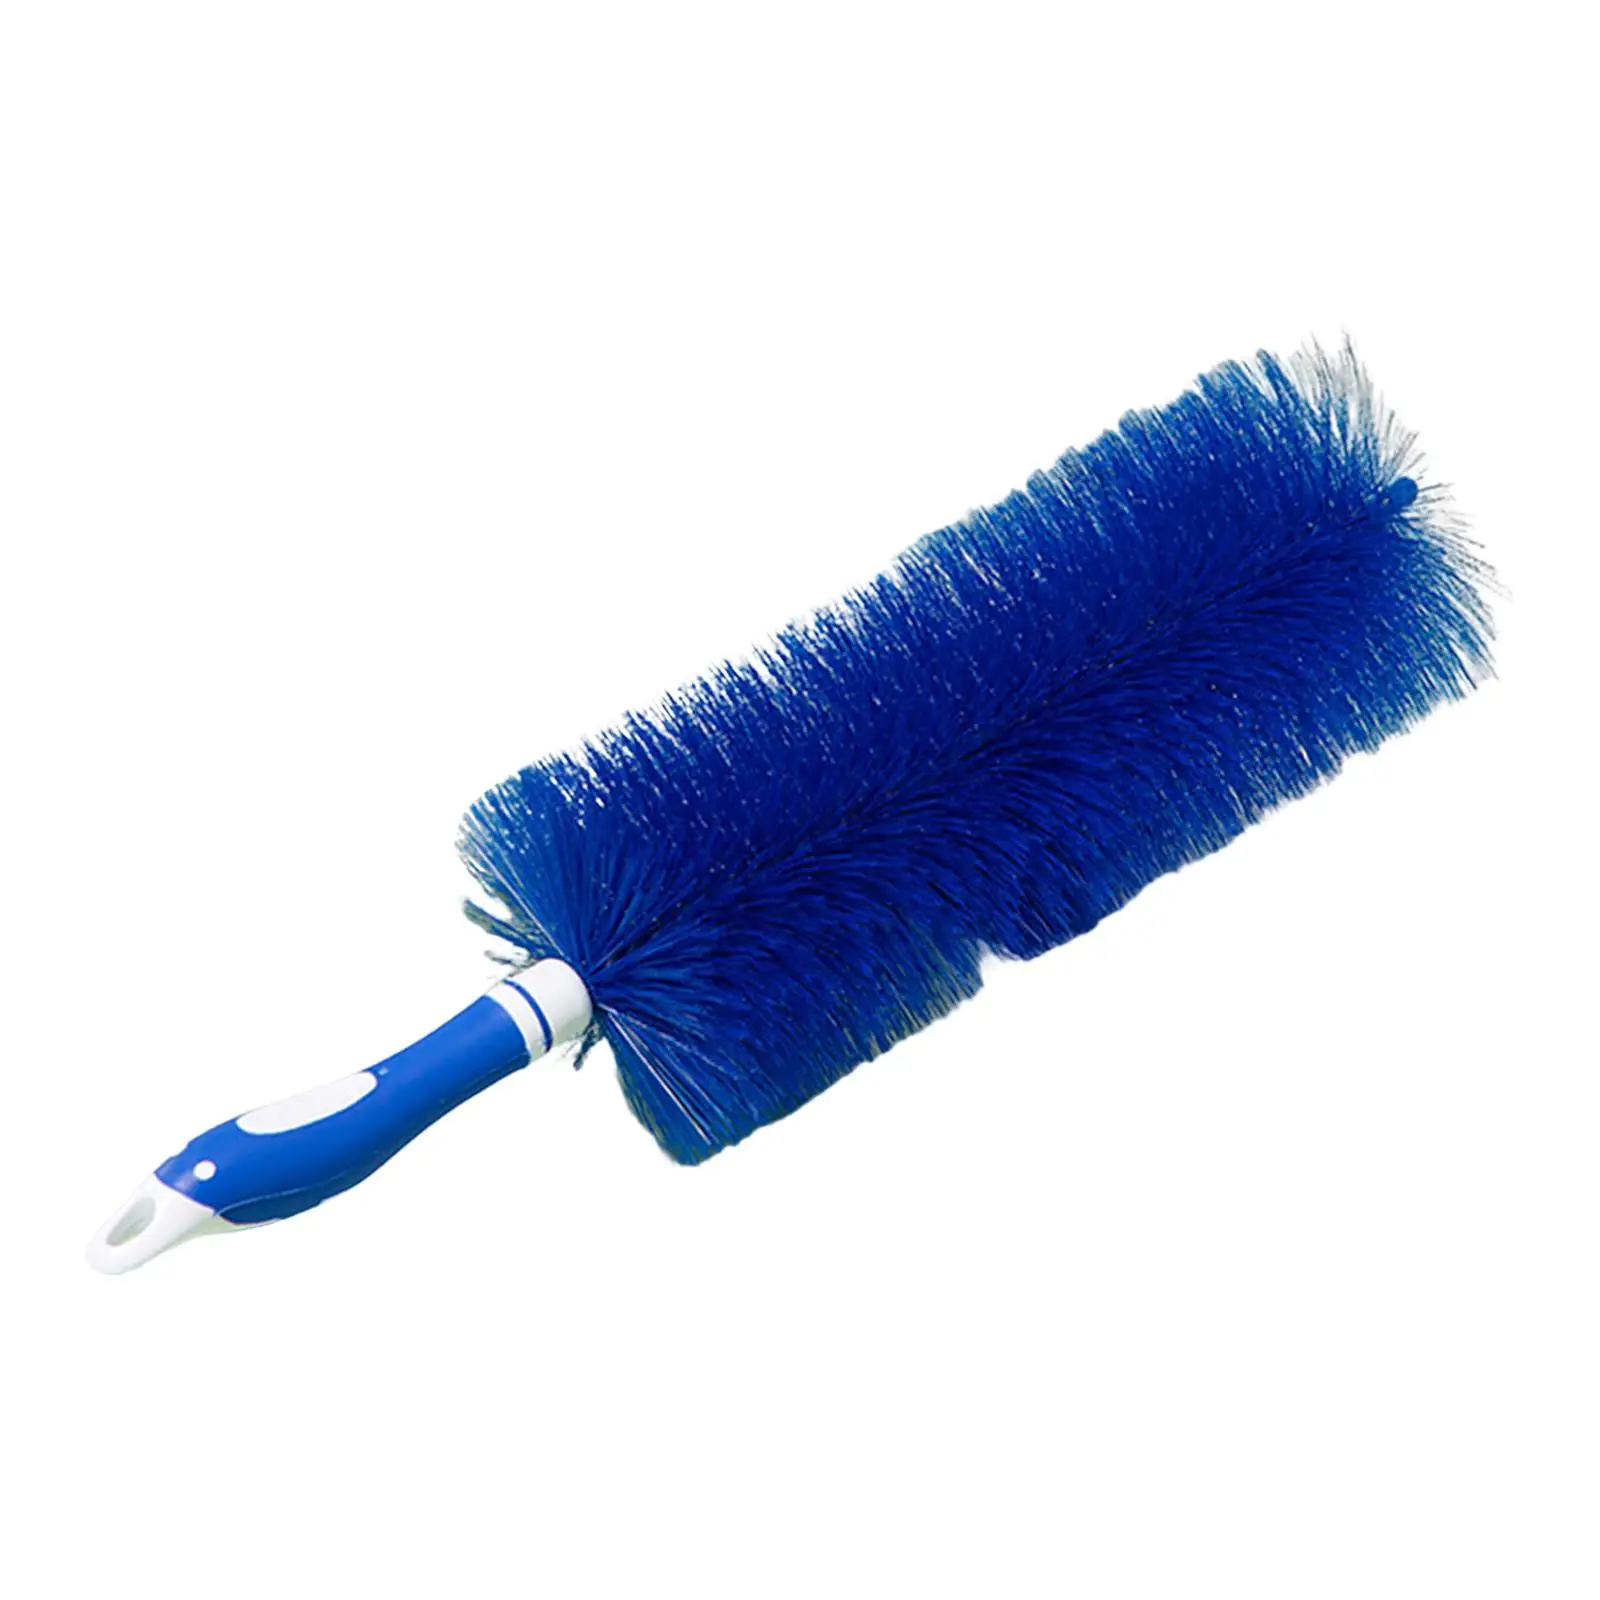 Dust Cleaner Brush Dust Remover Comfortable Grip Portable Hand Duster Duster